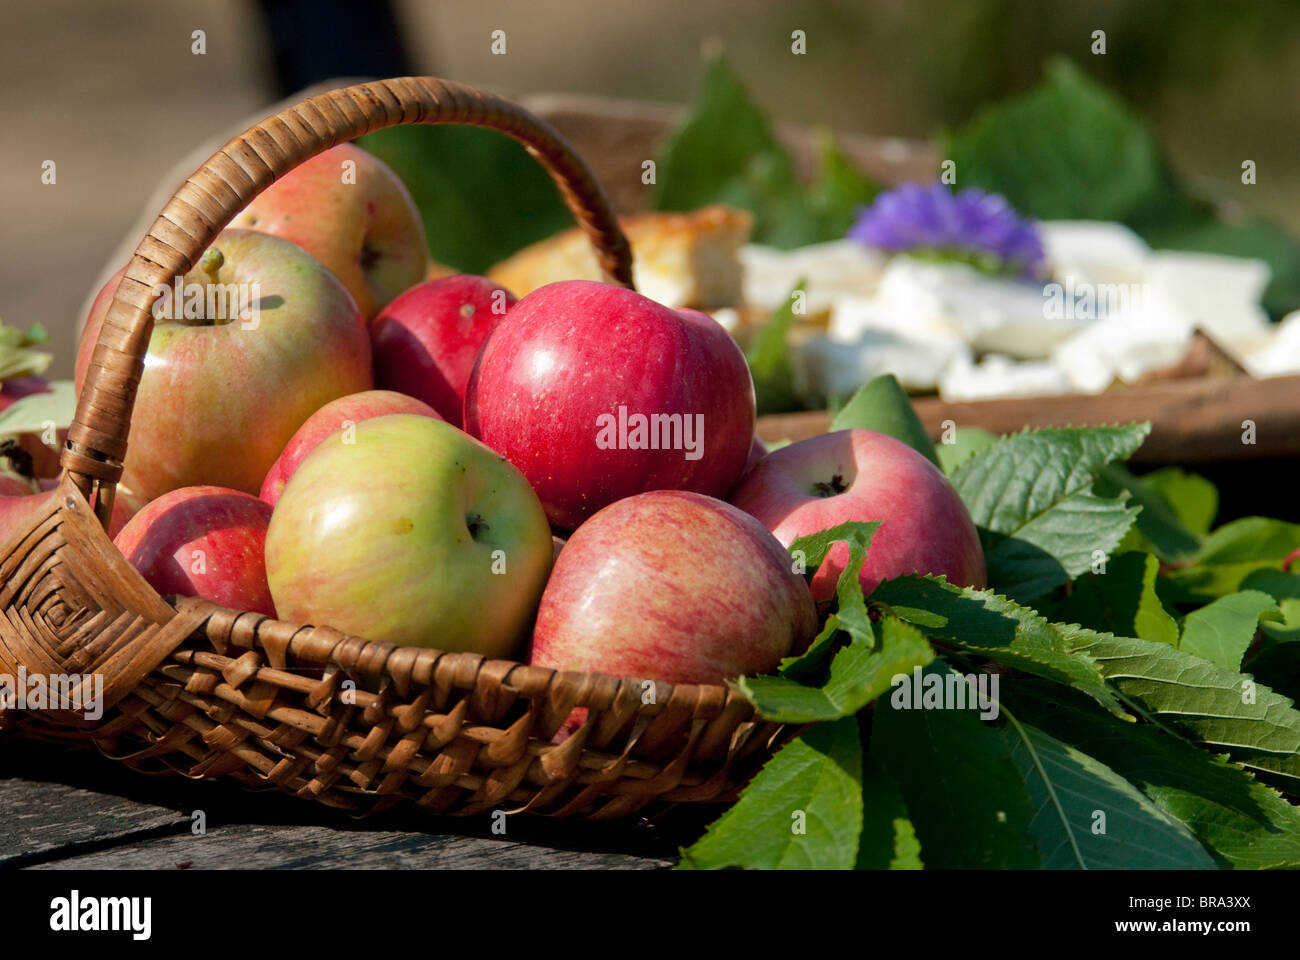 Serbia, Donji Milanovac. Port city along Danube River. Traditional Serbian snack with apples, goat cheese & bread. Stock Photo